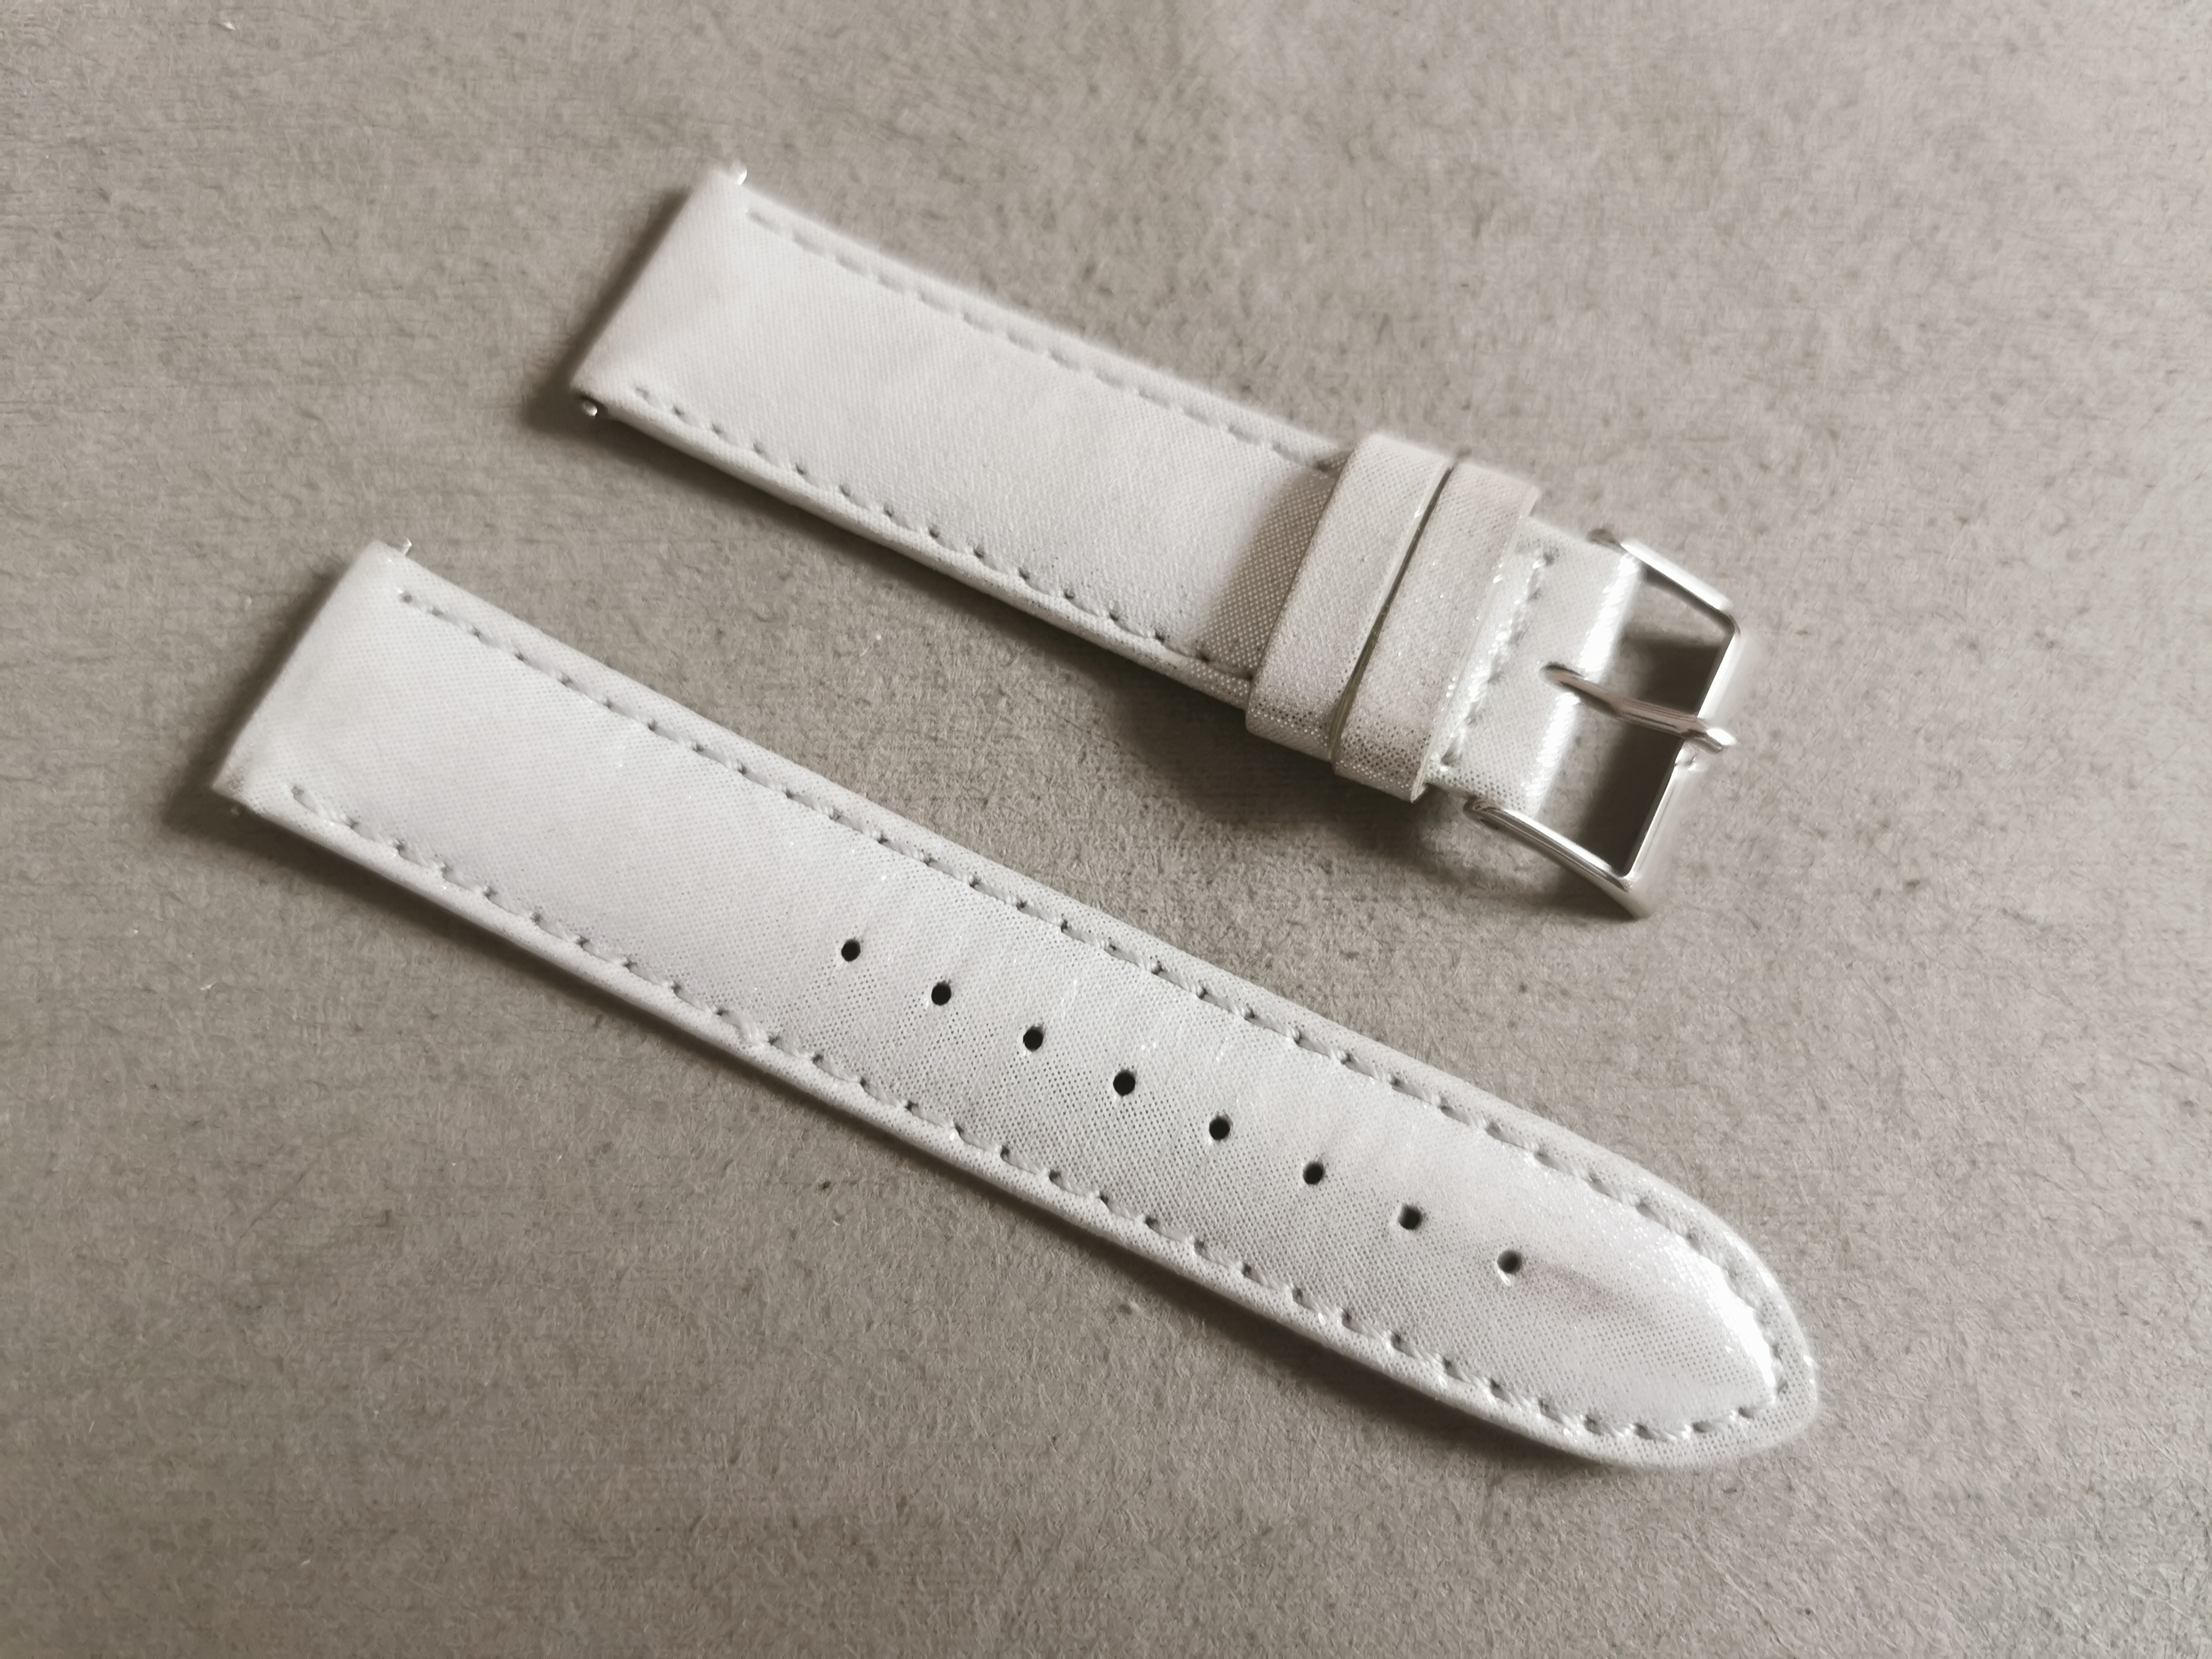 Guess Vintage leather strap glitter white mm 20 with steel buckle mm 20 newoldstock condition | San Giorgio a Cremano